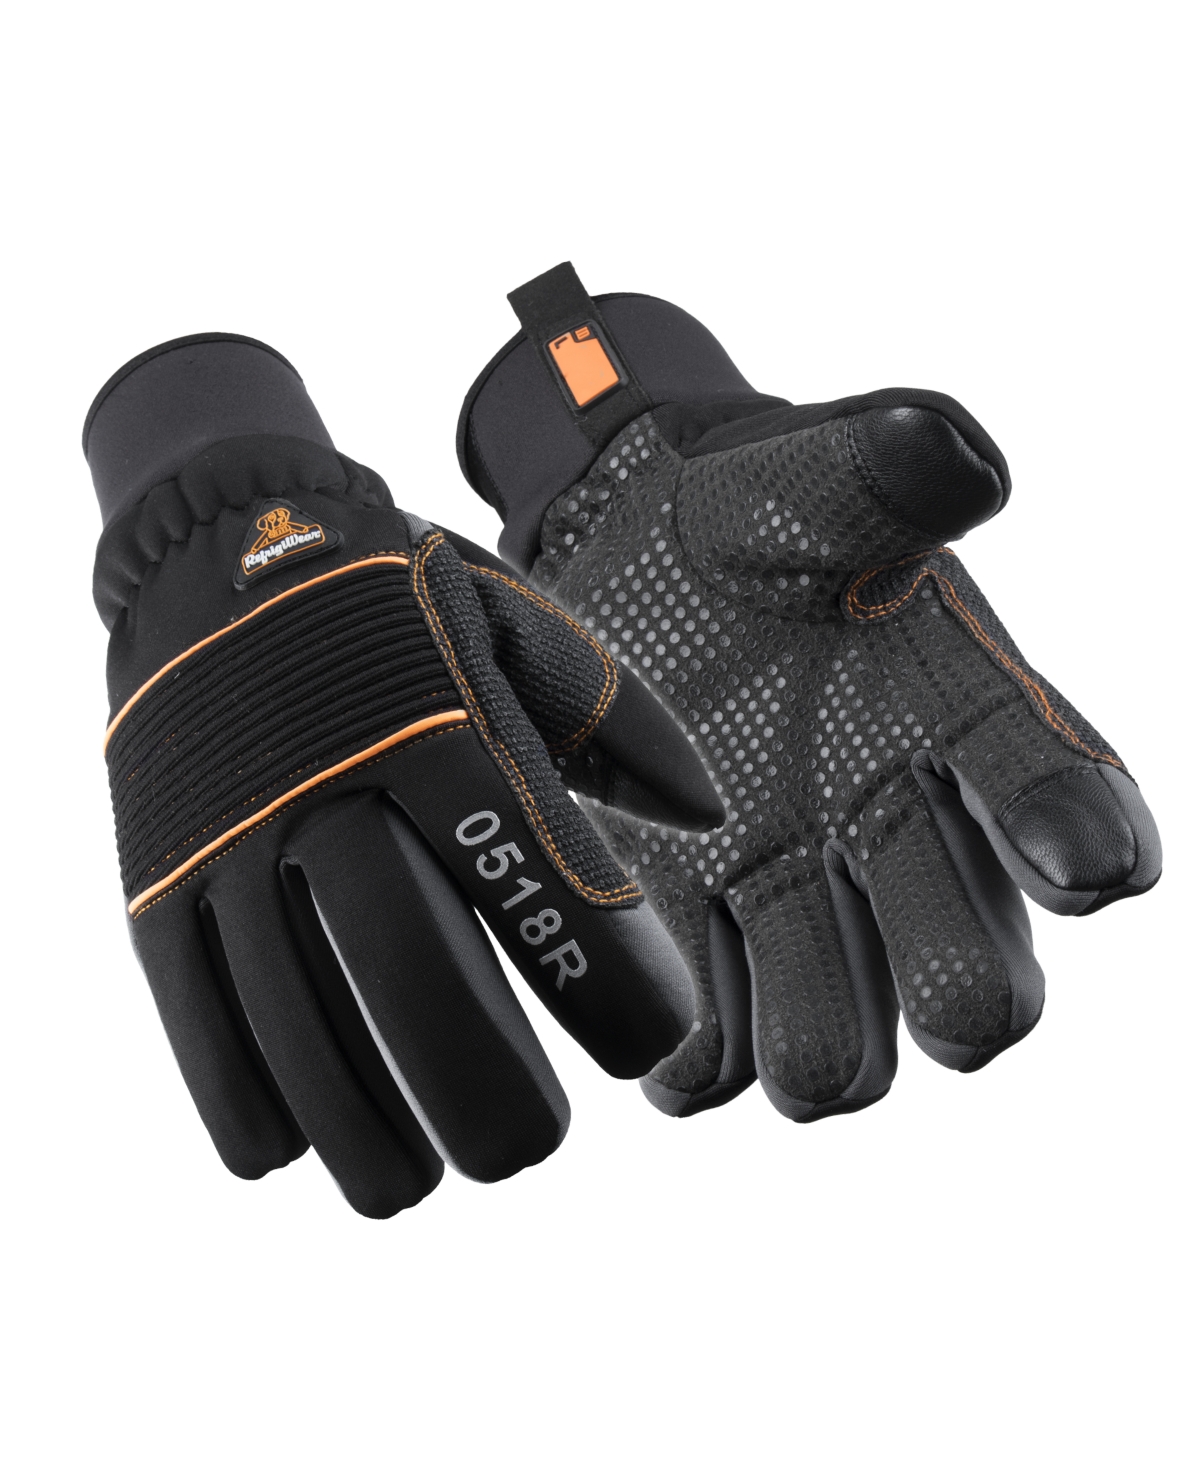 Men's Insulated Lined PolarForce Gloves with Grip Assist - Black